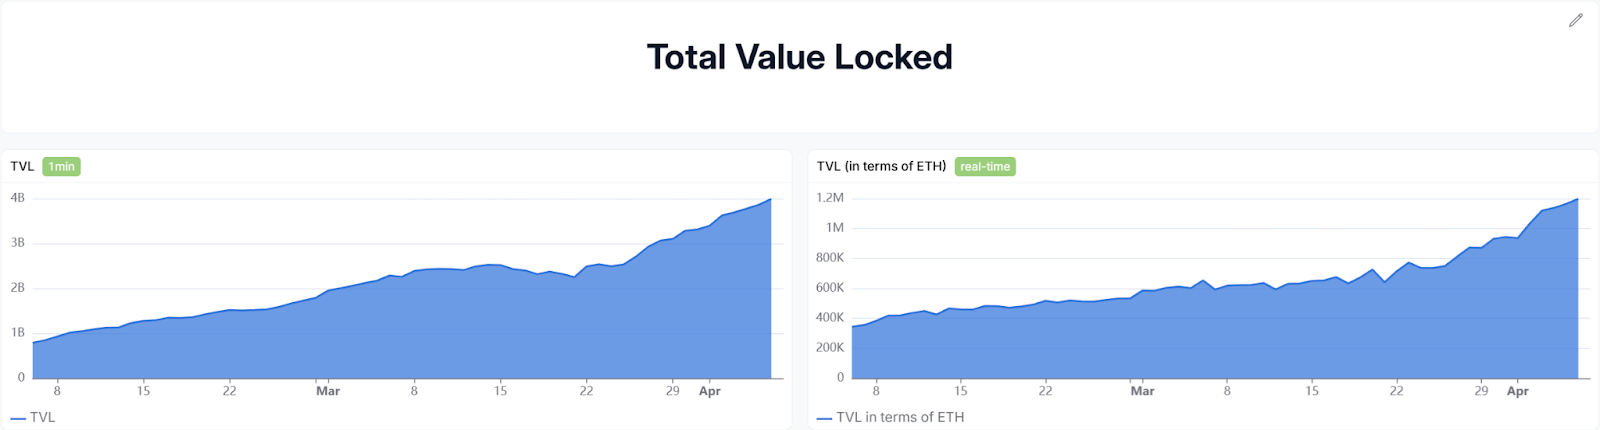 Total Value Locked Report 